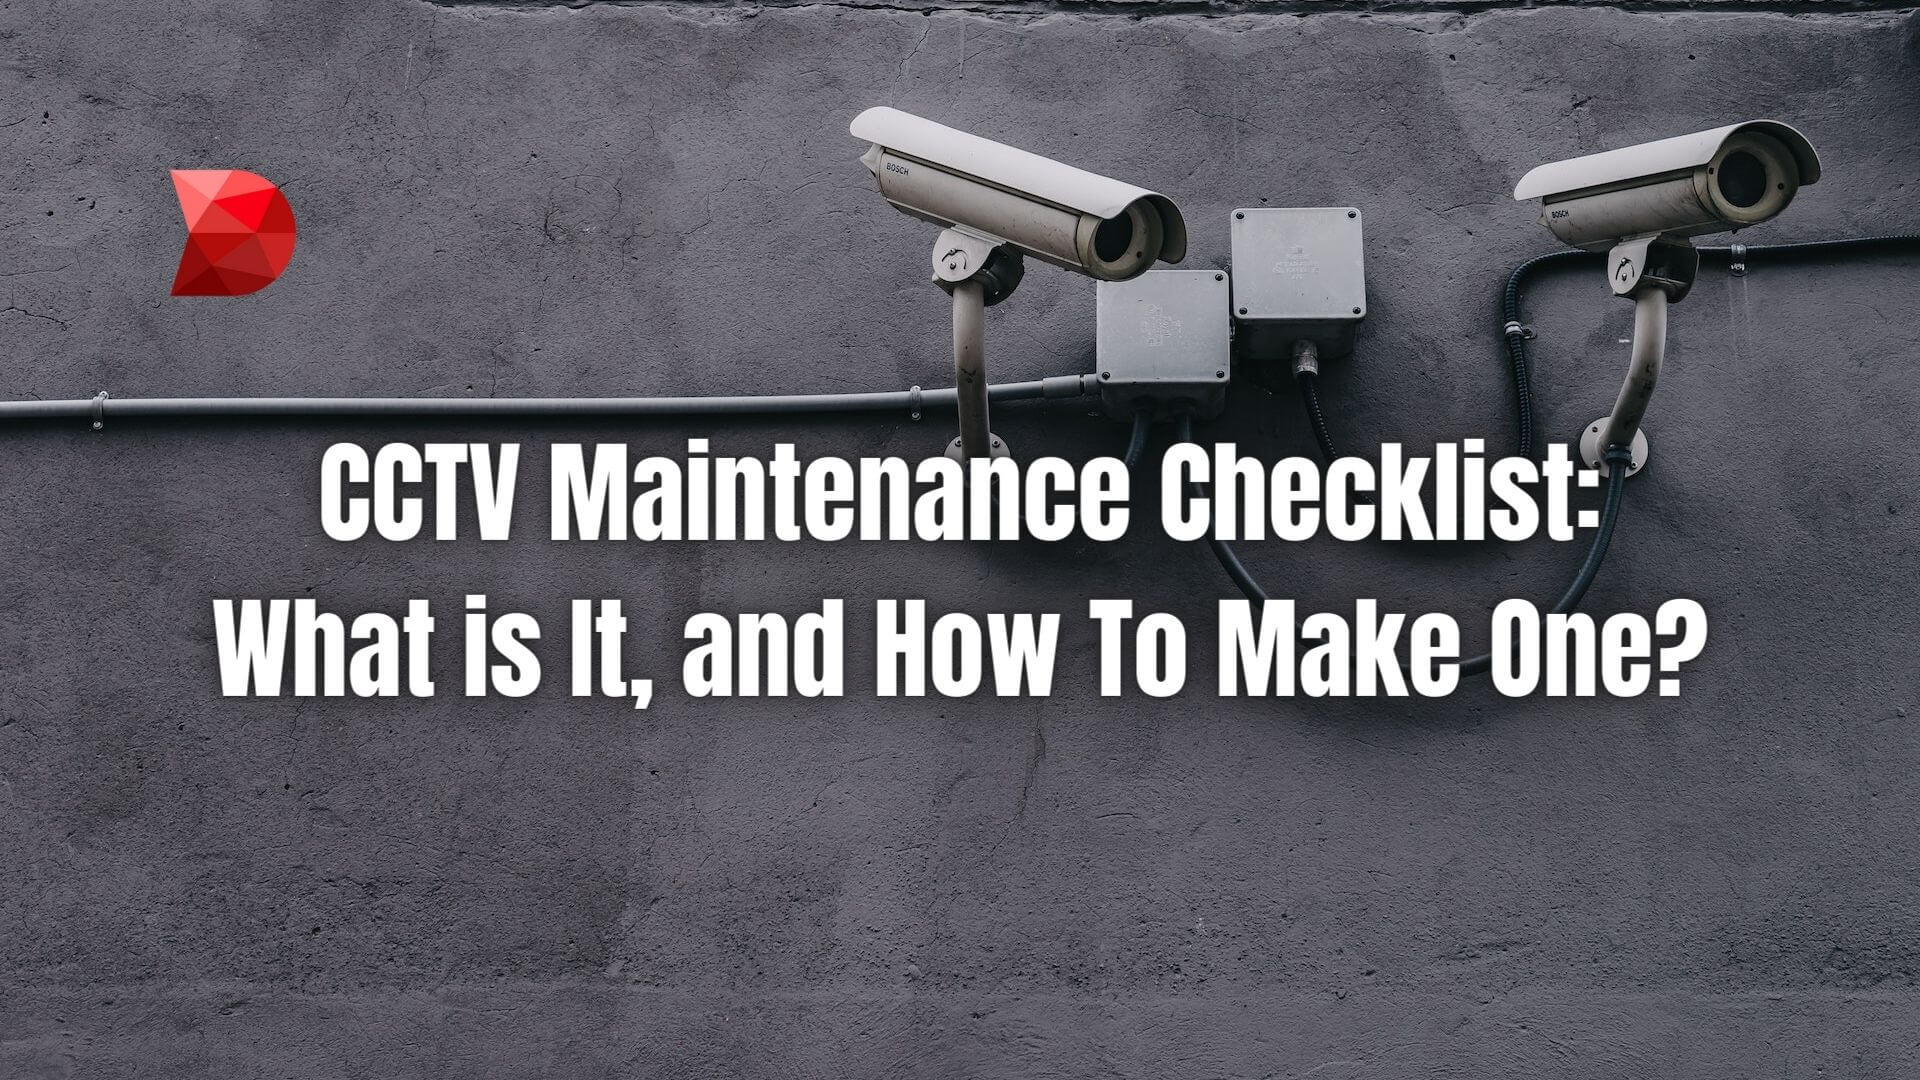 This article shows why it's essential to have a CCTV maintenance checklist for your security cameras. Click here to learn more!